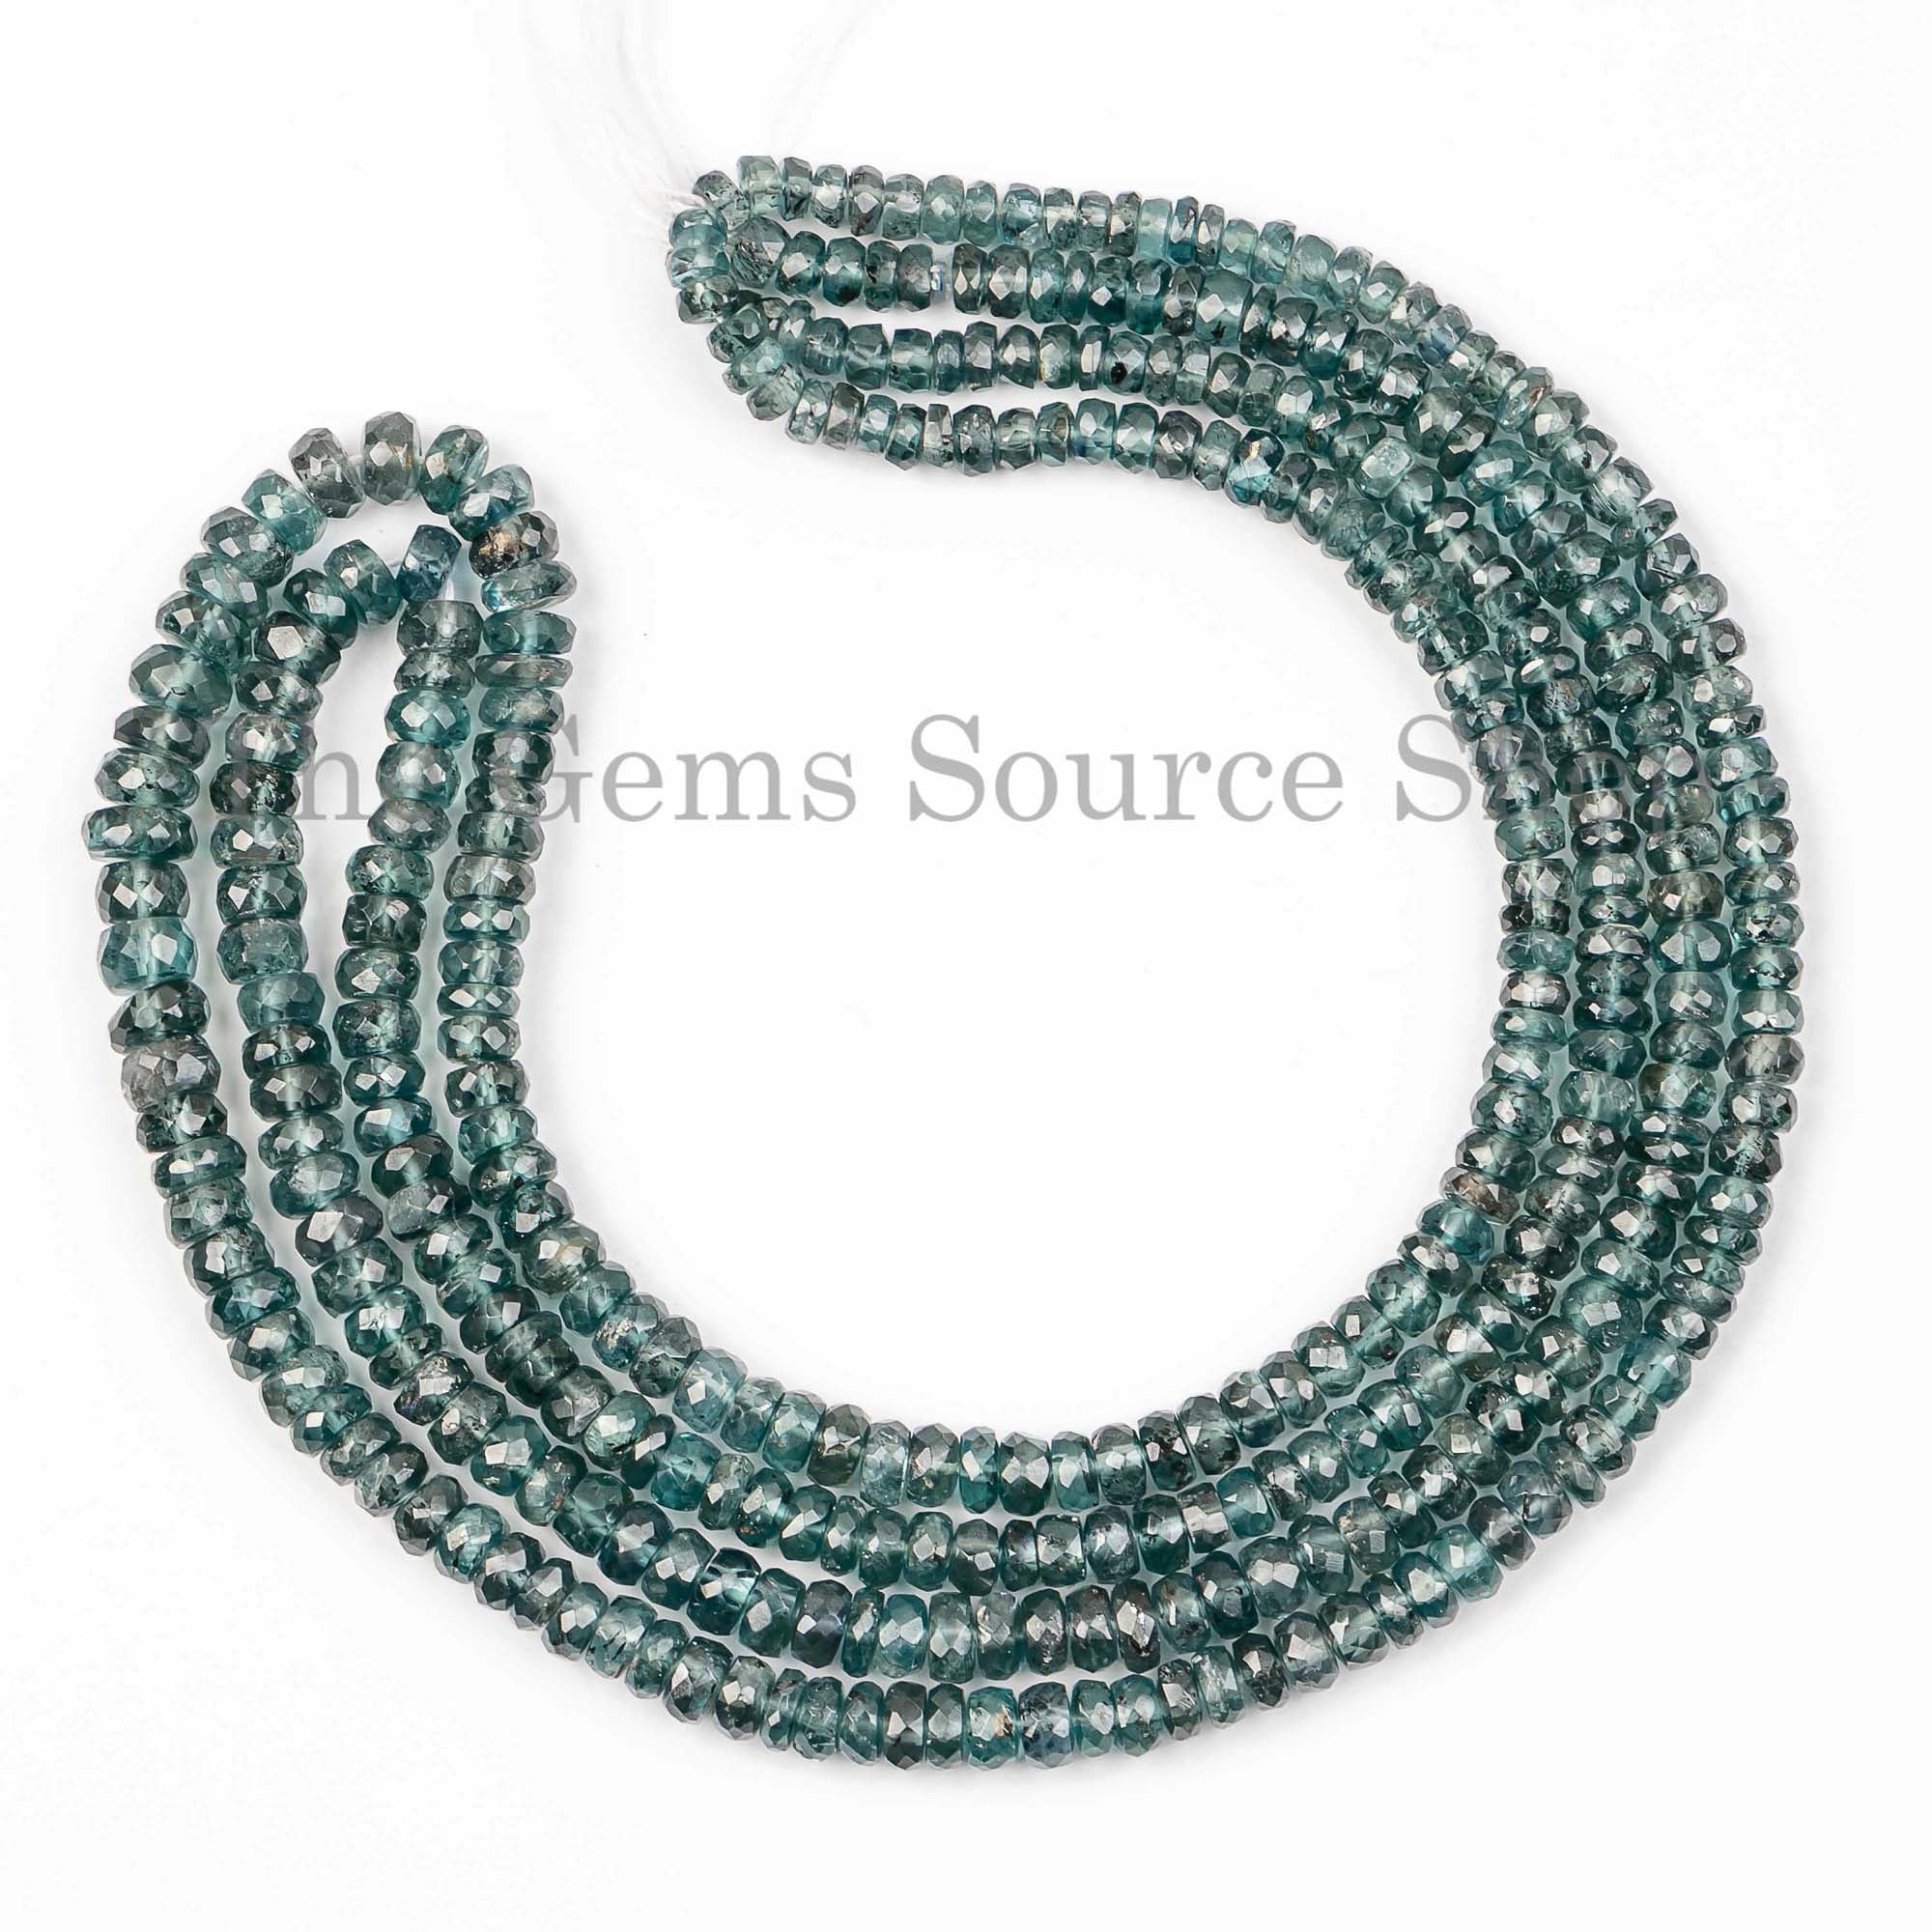 Mint Kyanite Faceted Rondelle Beads, Green Kyanite Faceted Rondelle Beads-